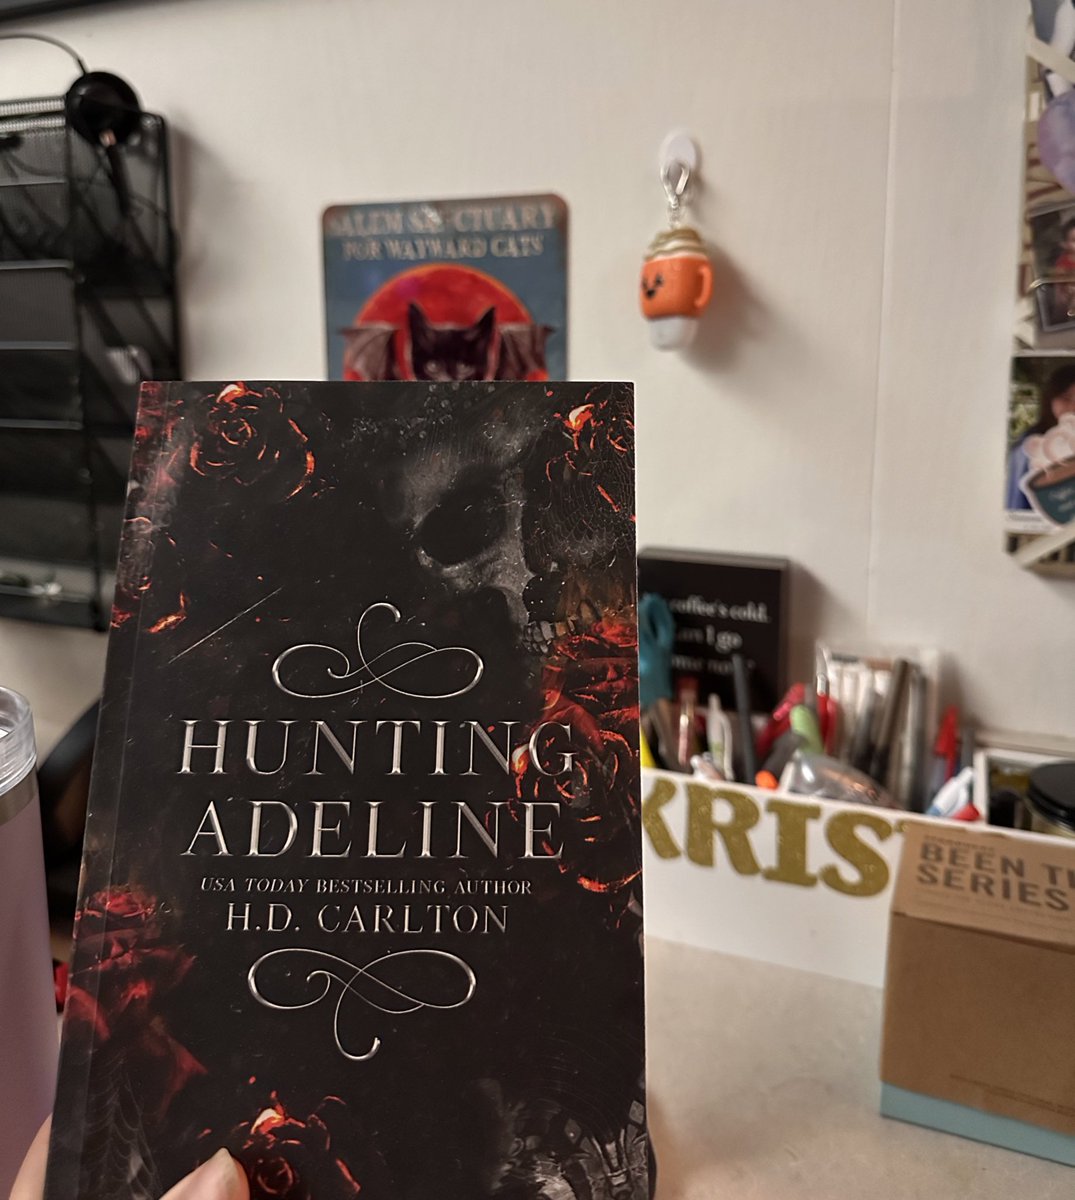 10/10 way better than the first one #hauntingadeline #huntingadeline #booktok